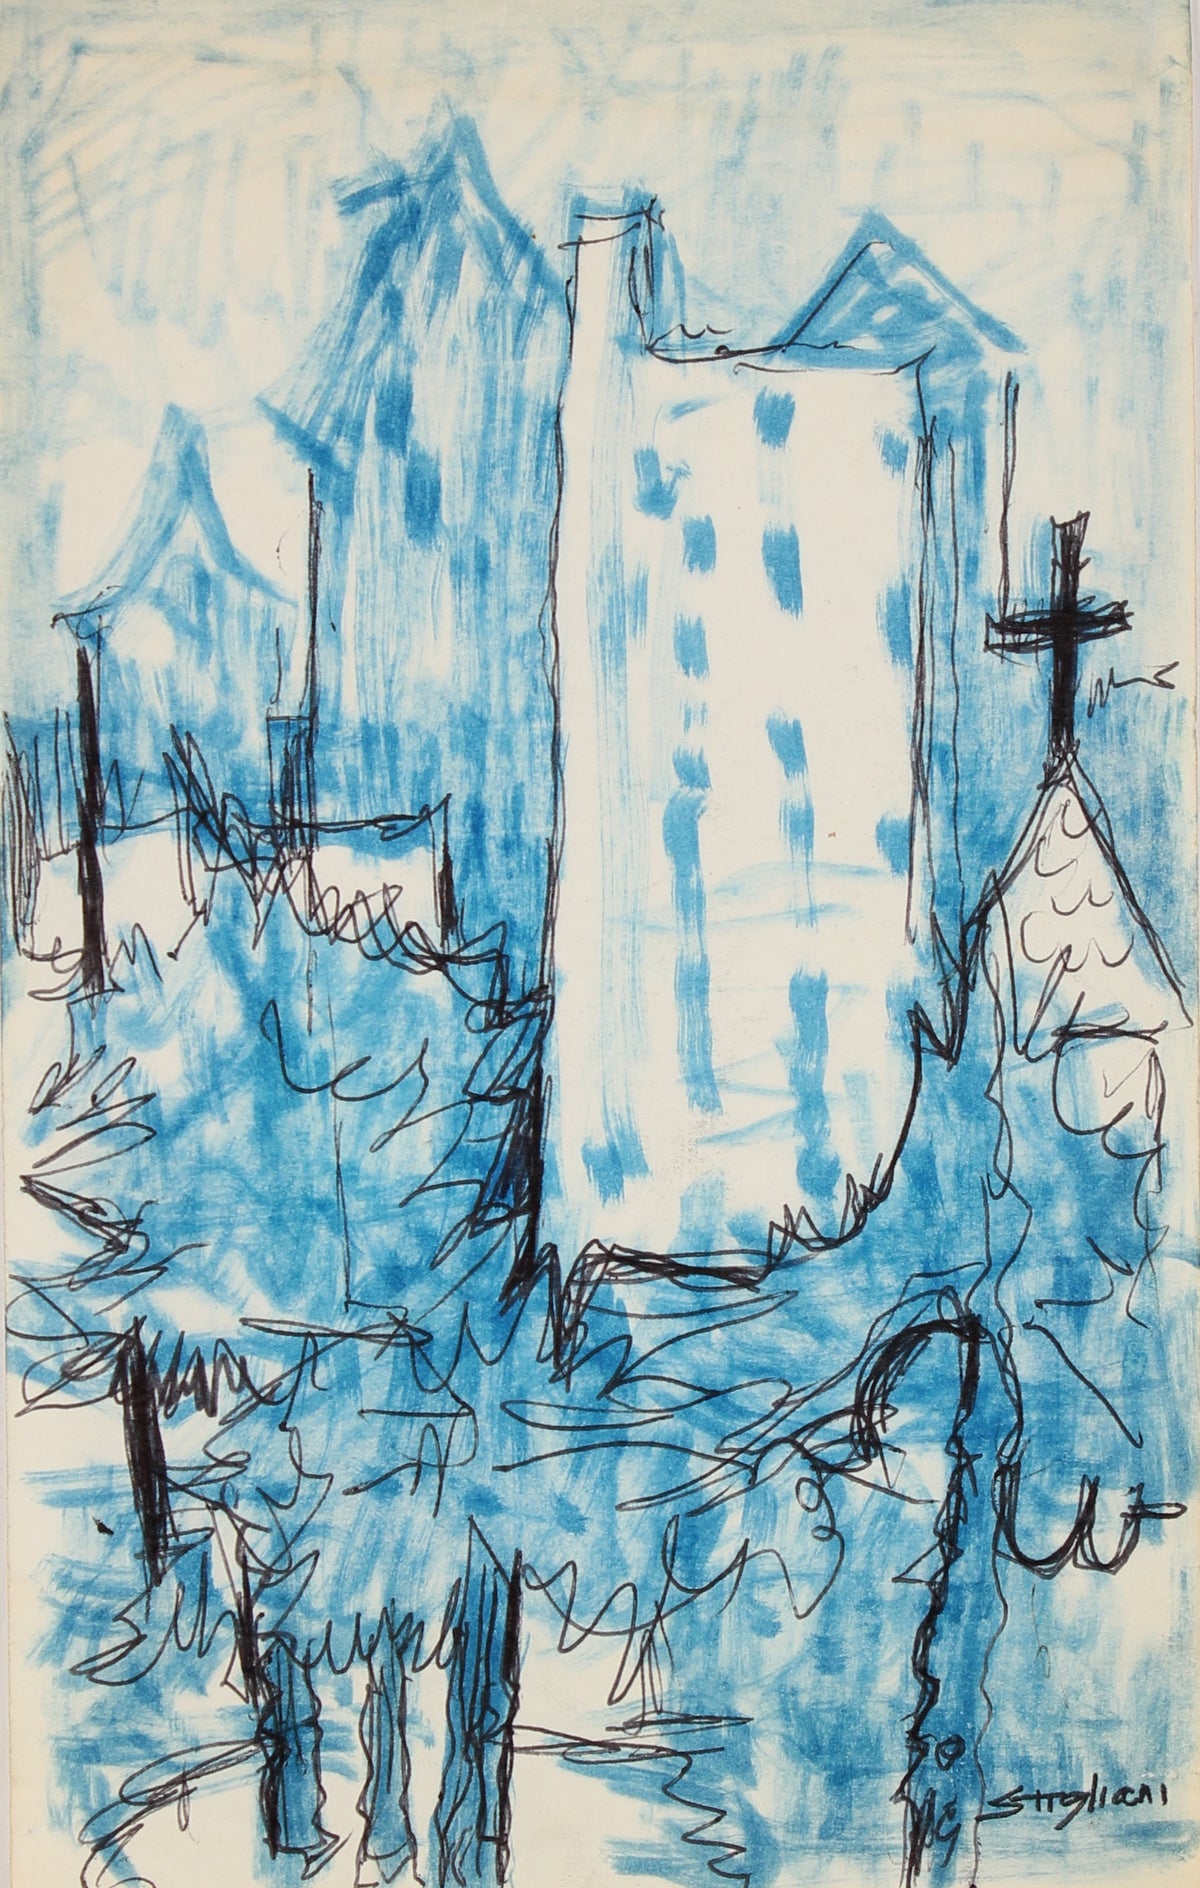 Cool Abstracted New York Cityscape&lt;br&gt;20th Century Ink&lt;br&gt;&lt;br&gt;#90655